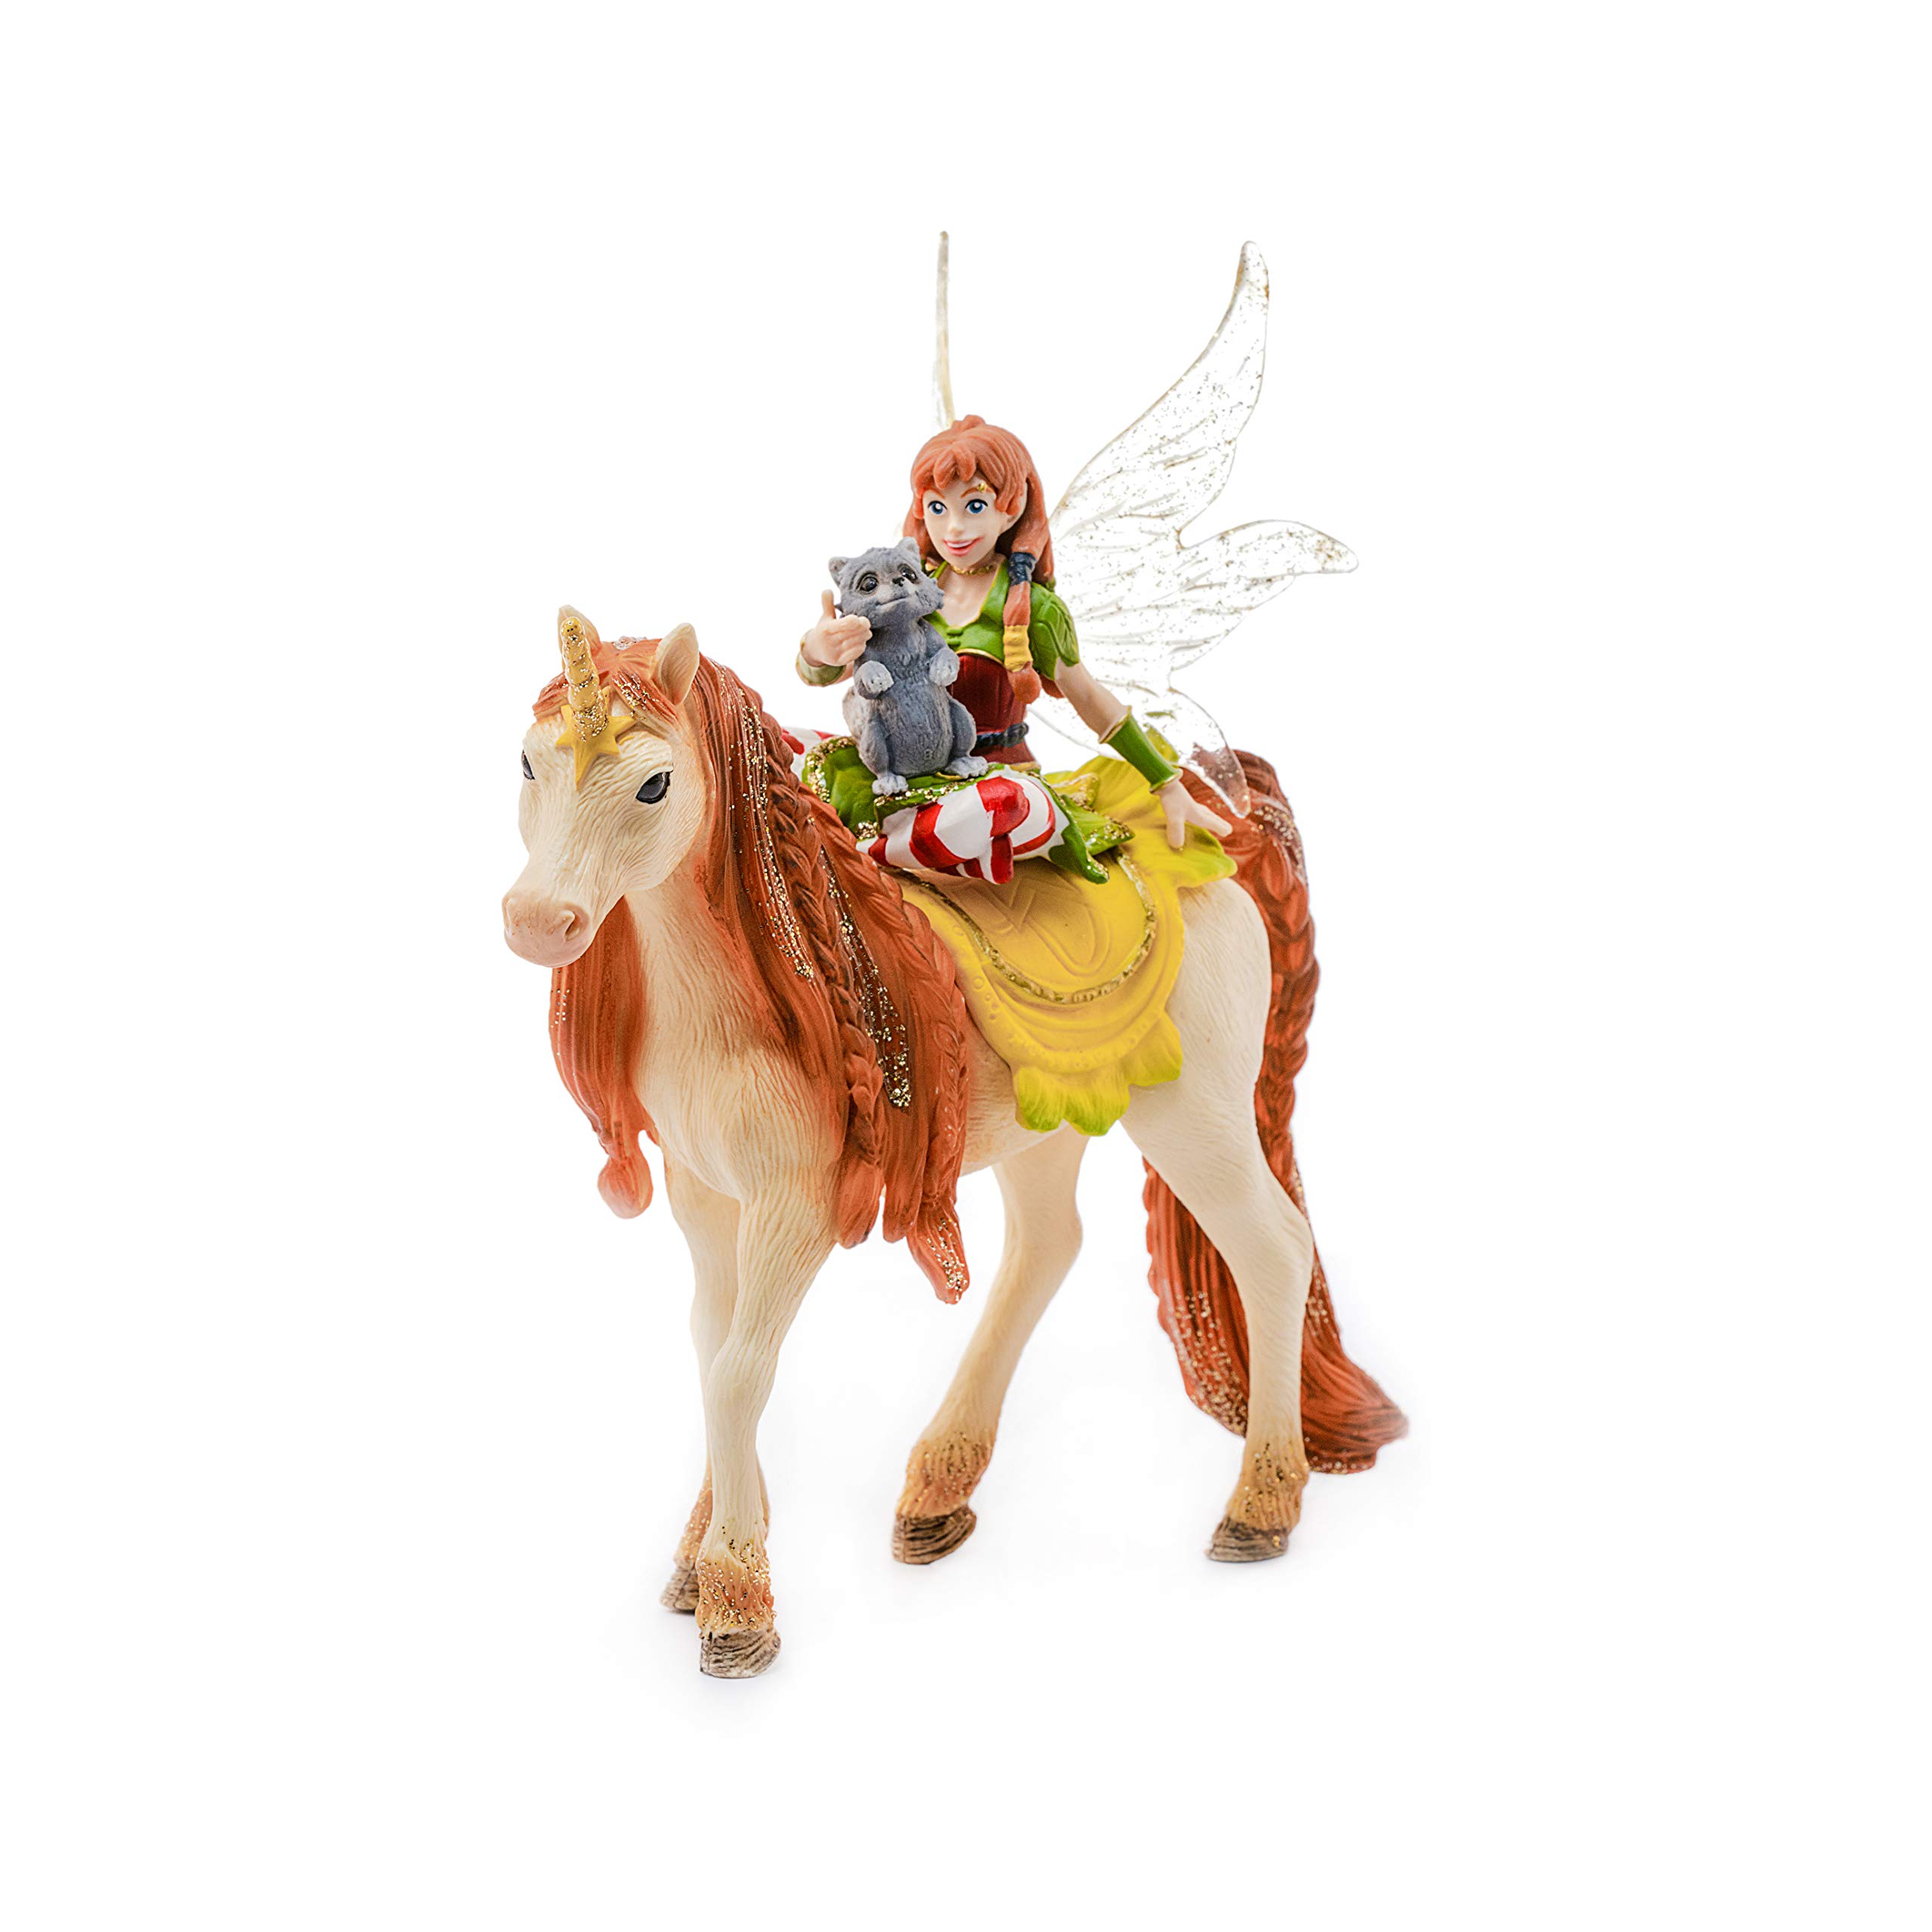 Schleich bayala, Fairy Unicorn Toys for Girls and Boys, Fairy Marween Doll with Glitter Unicorn Toy, Ages 5+